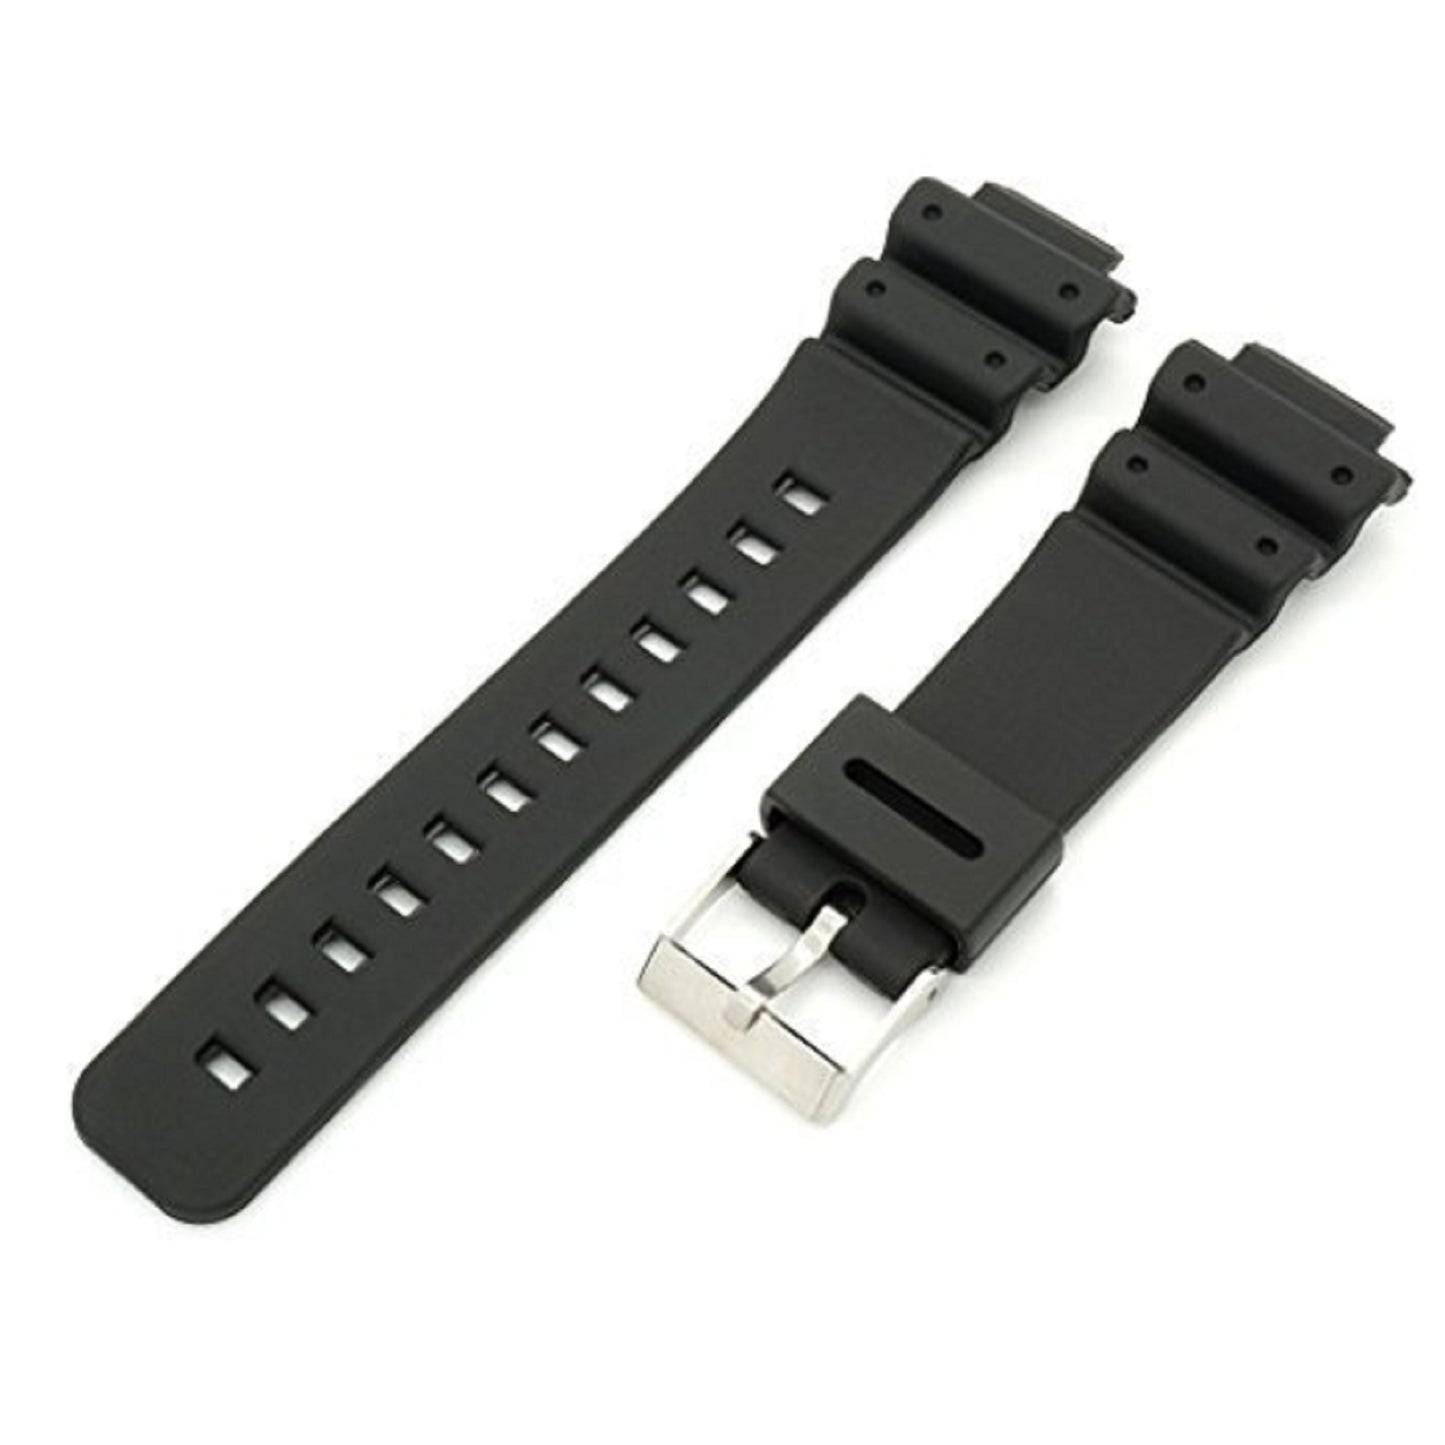 DBLACK [CDS5] 16MM RESIN WATCH STRAP (BLACK) // "SUITABLE FOR CASIO G-SHOCK DW-5300, DW-5900C & OTHERS WATCHES"